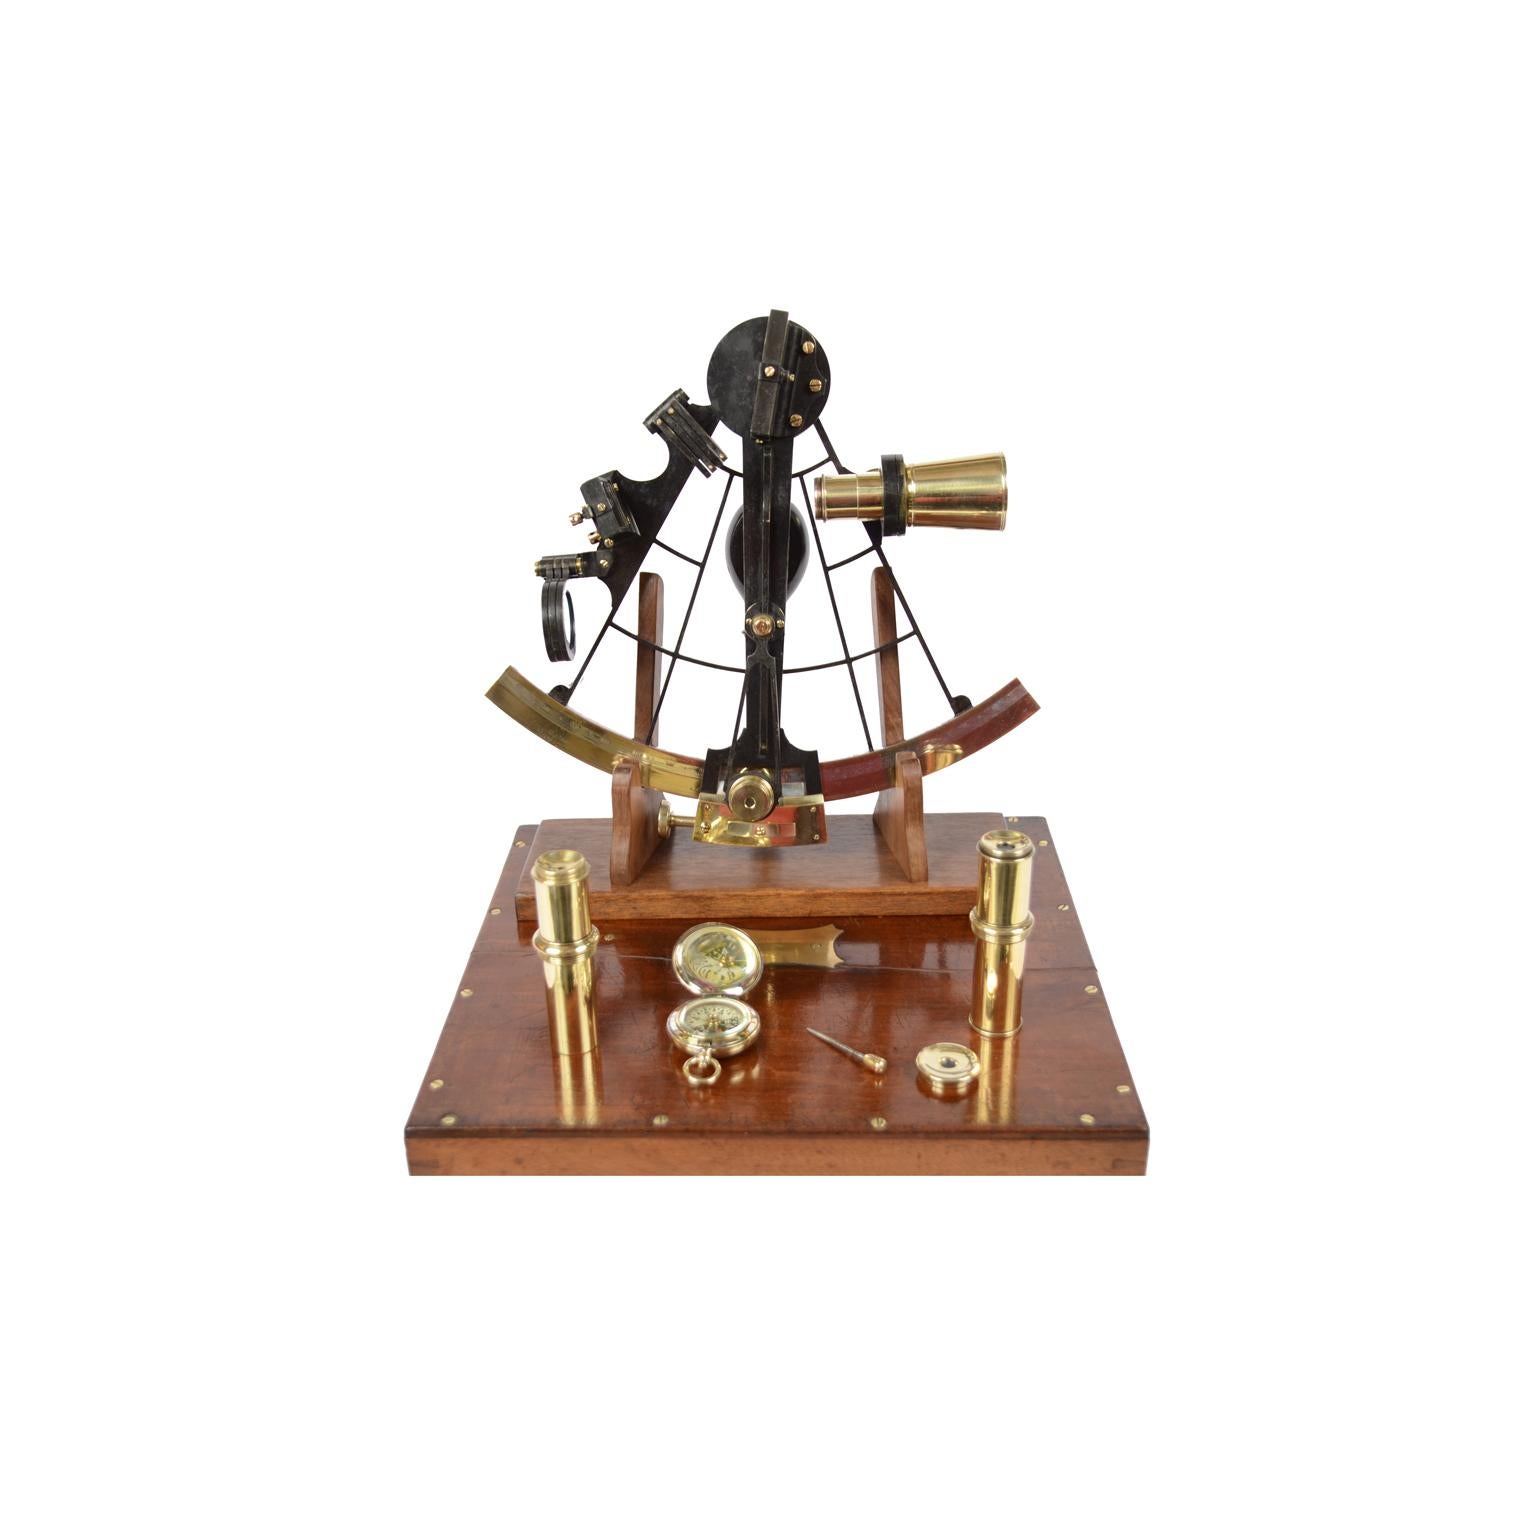 Brass sextant signed Negretti & Zambra made in the second half of the 19th century, complete with lenses and compass placed in its original mahogany box complete with key lock and brass hinges. Silver flap and vernier, wooden handle, 3 colored